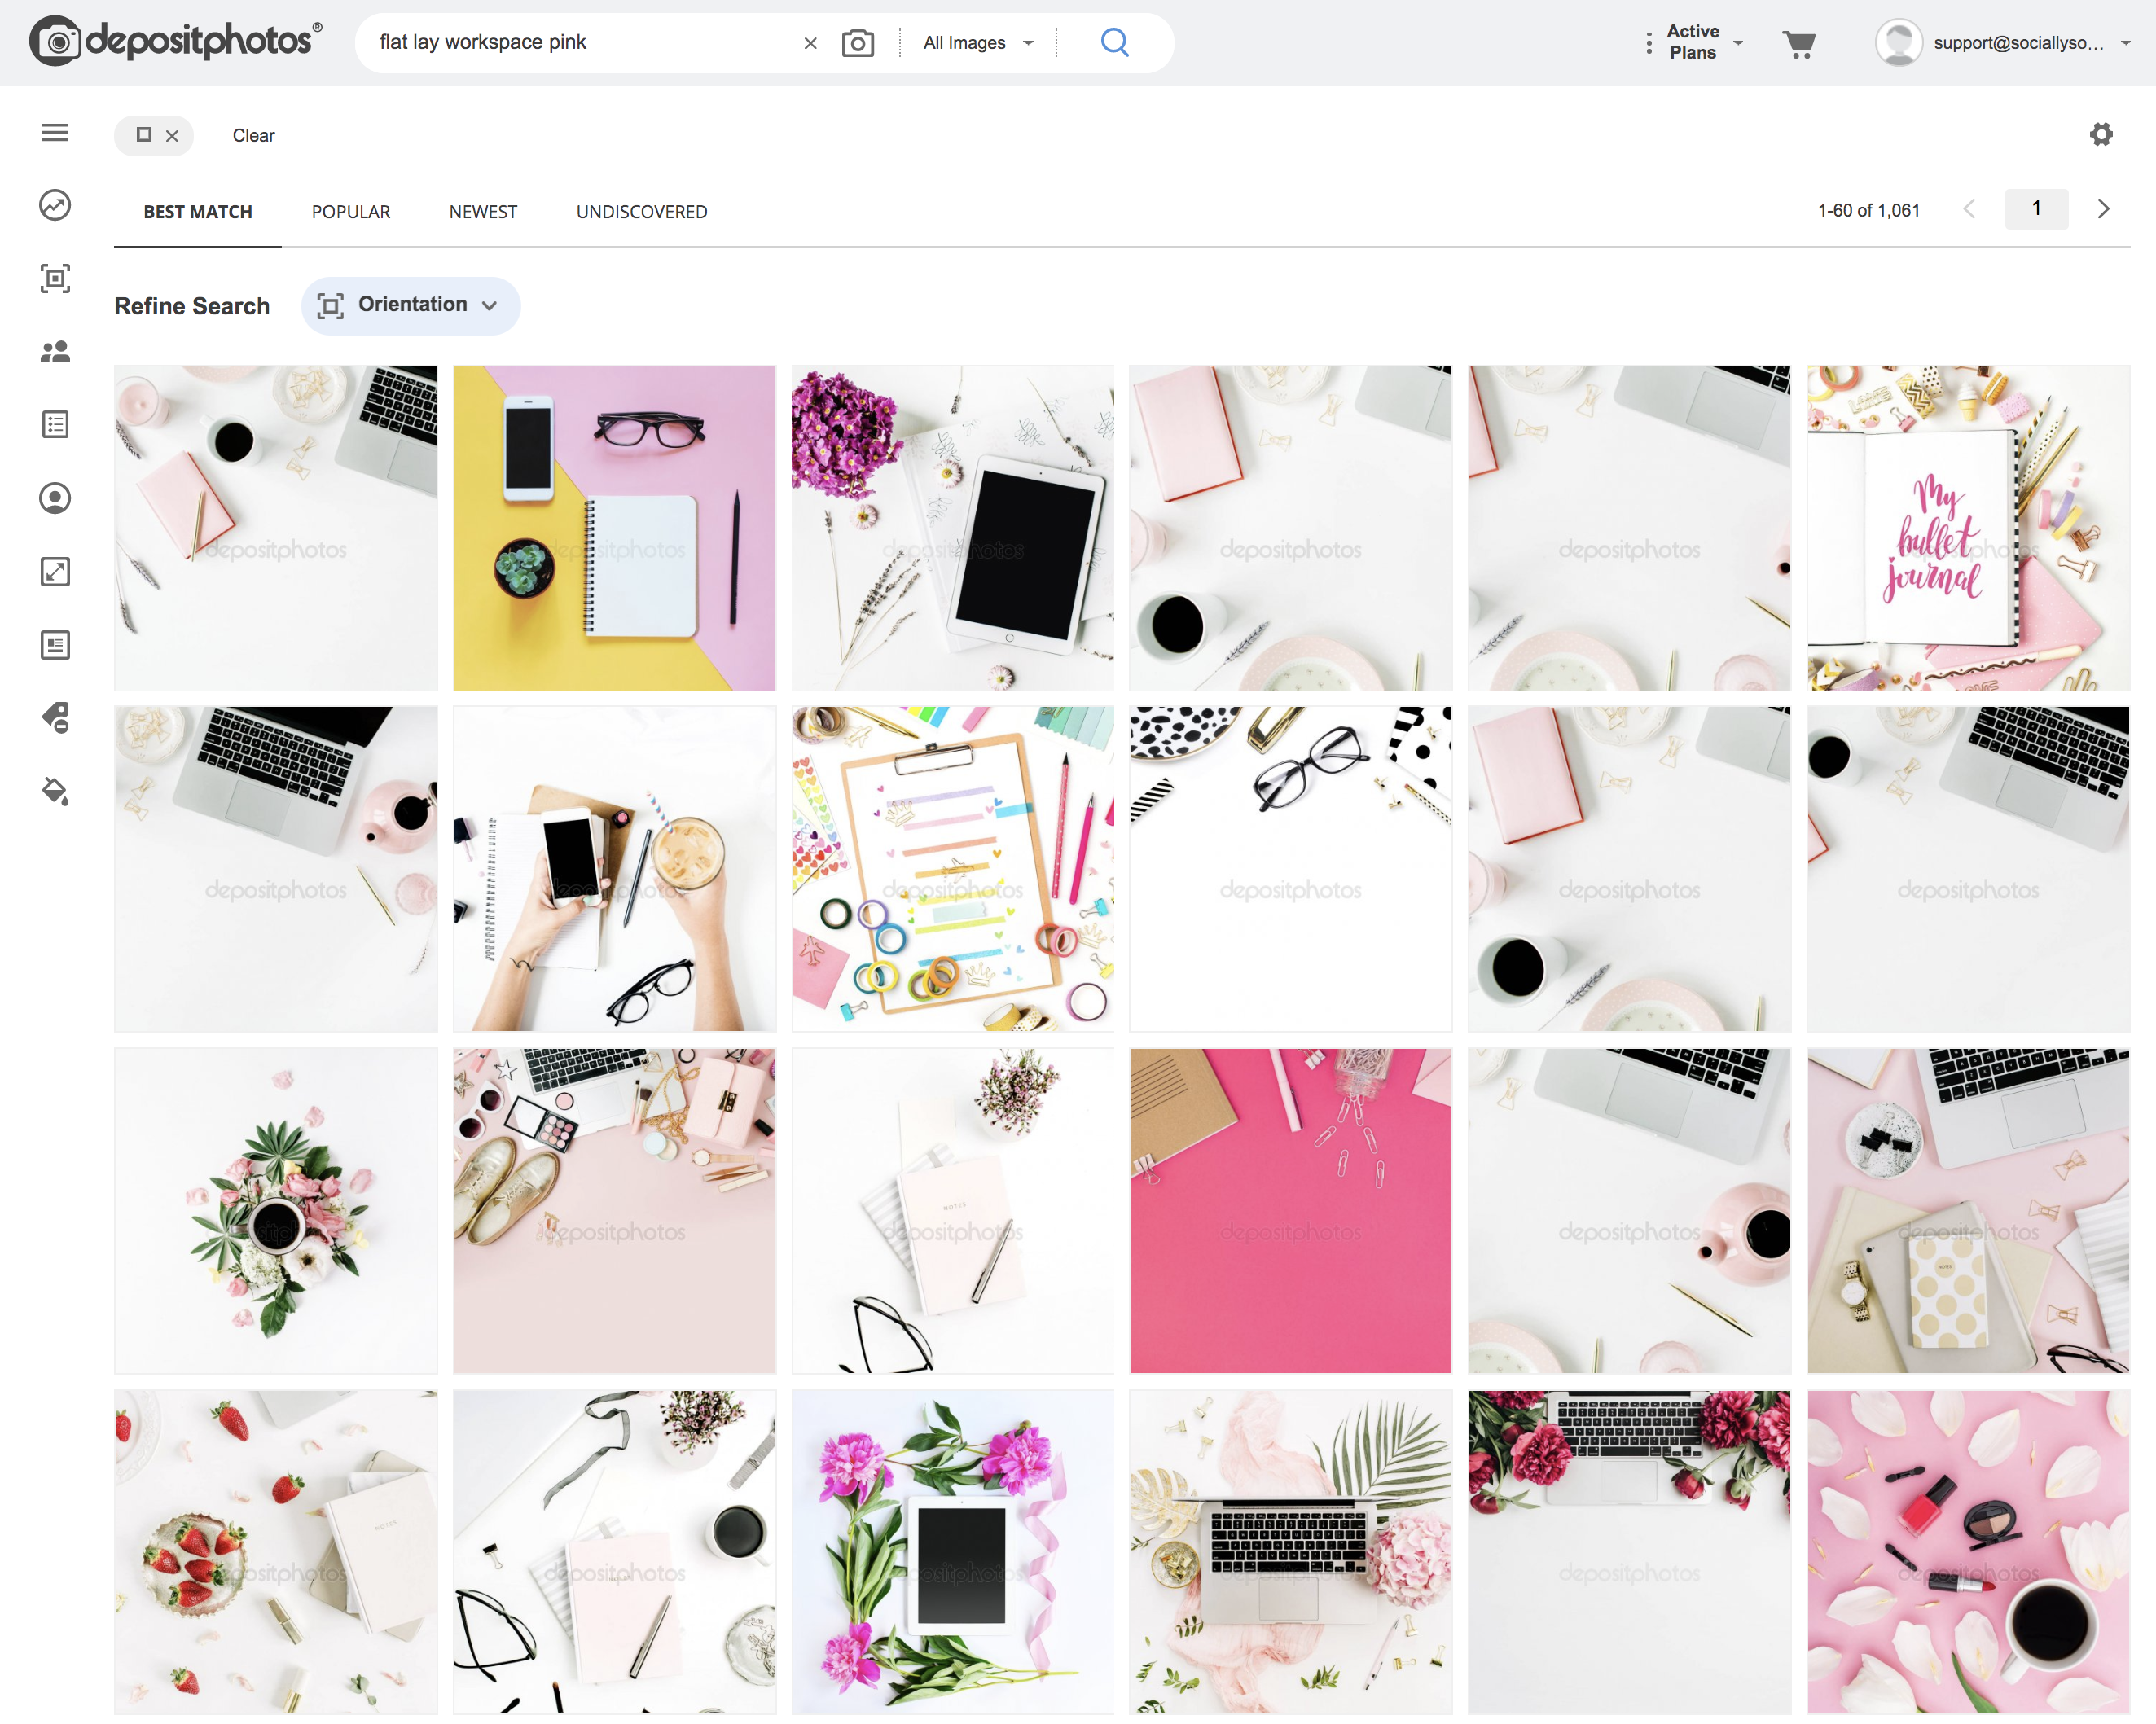 Search for Pink + Workspace + White Space